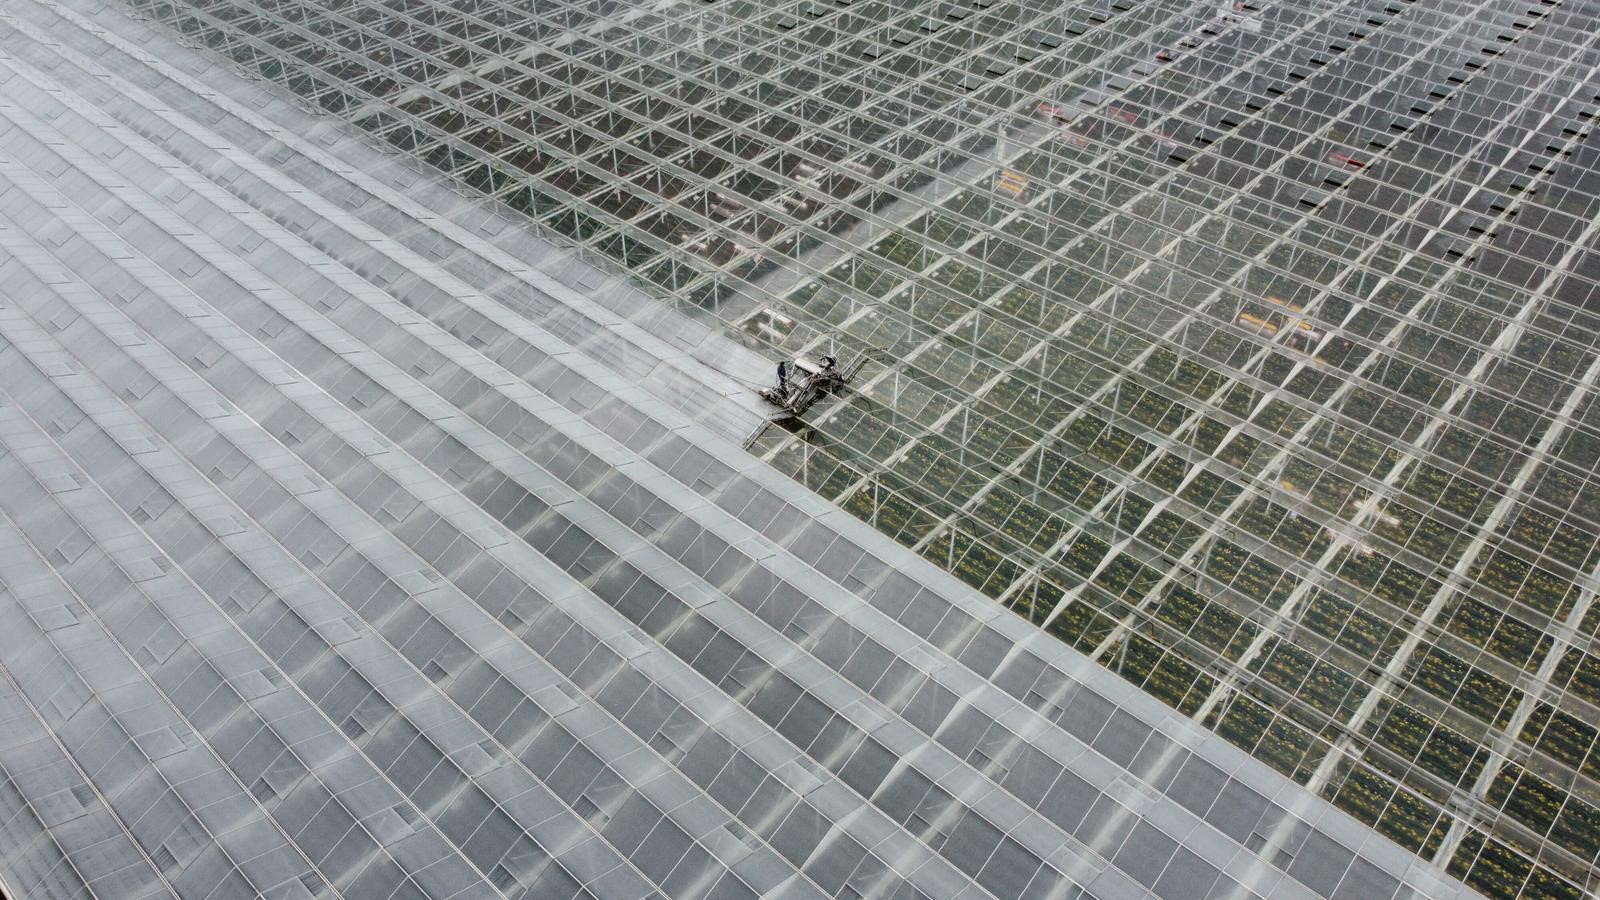 Washing and coating machine spray coating on roof of horticultural greenhouse